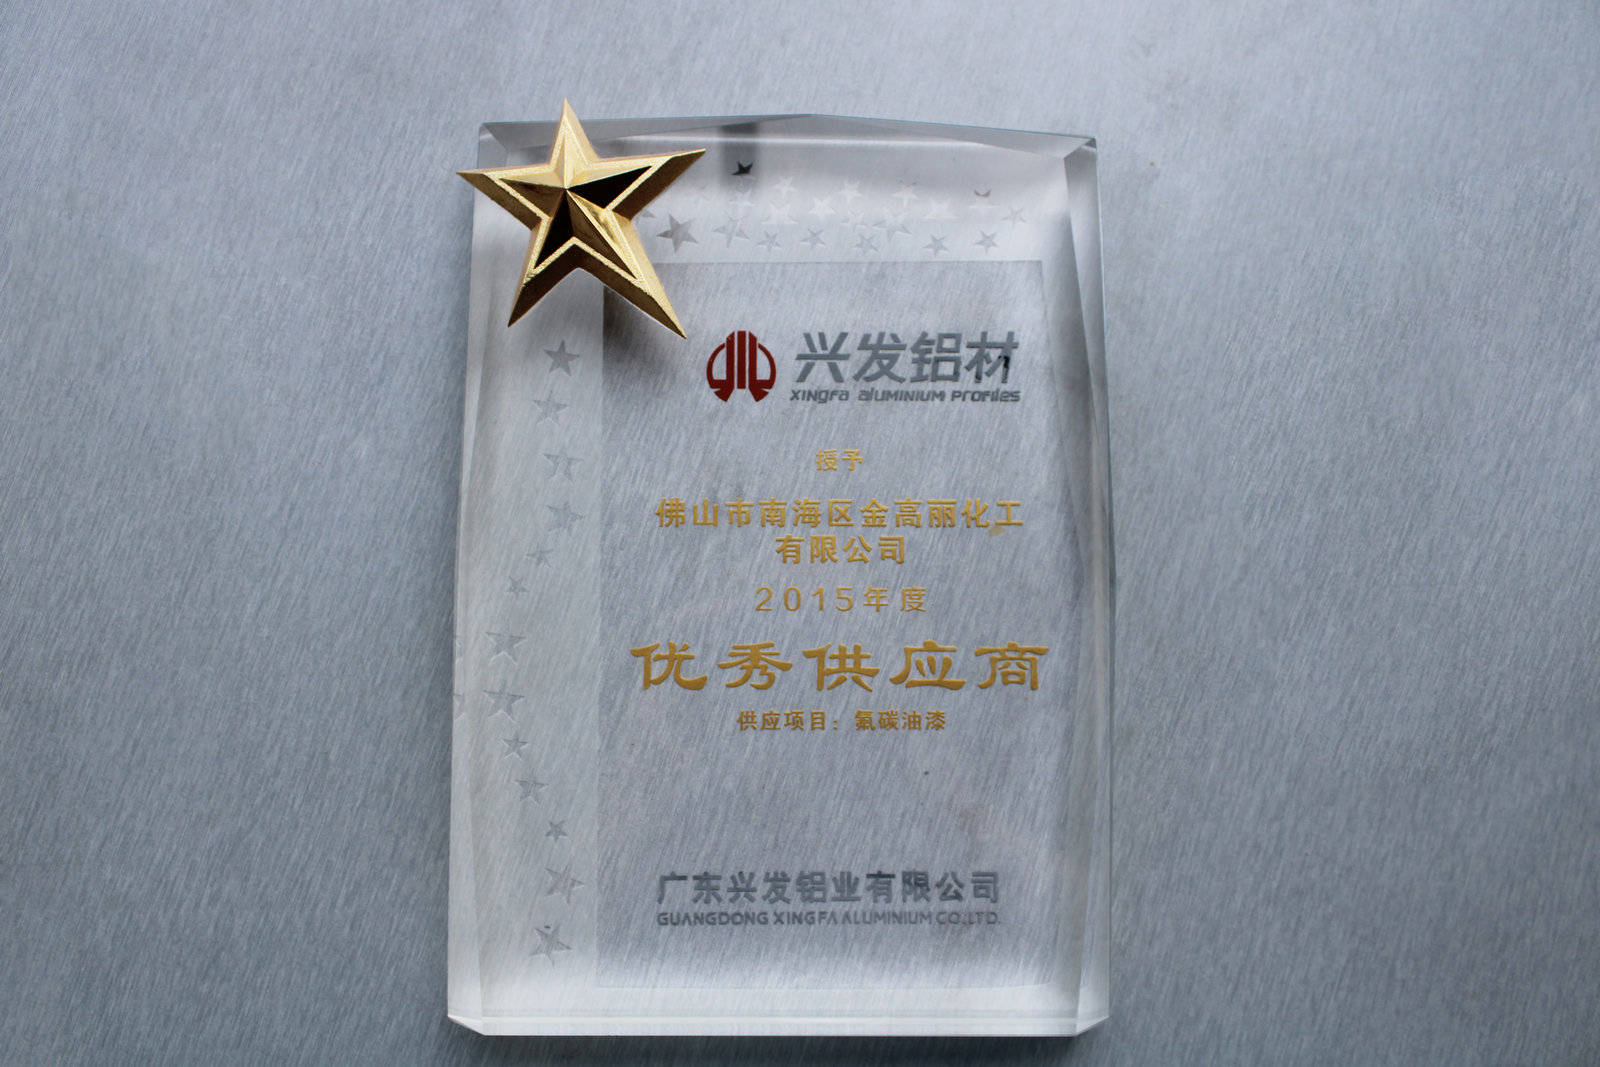 2015 Xingfa Aluminum Holdings Limited "Excellent Supplier"